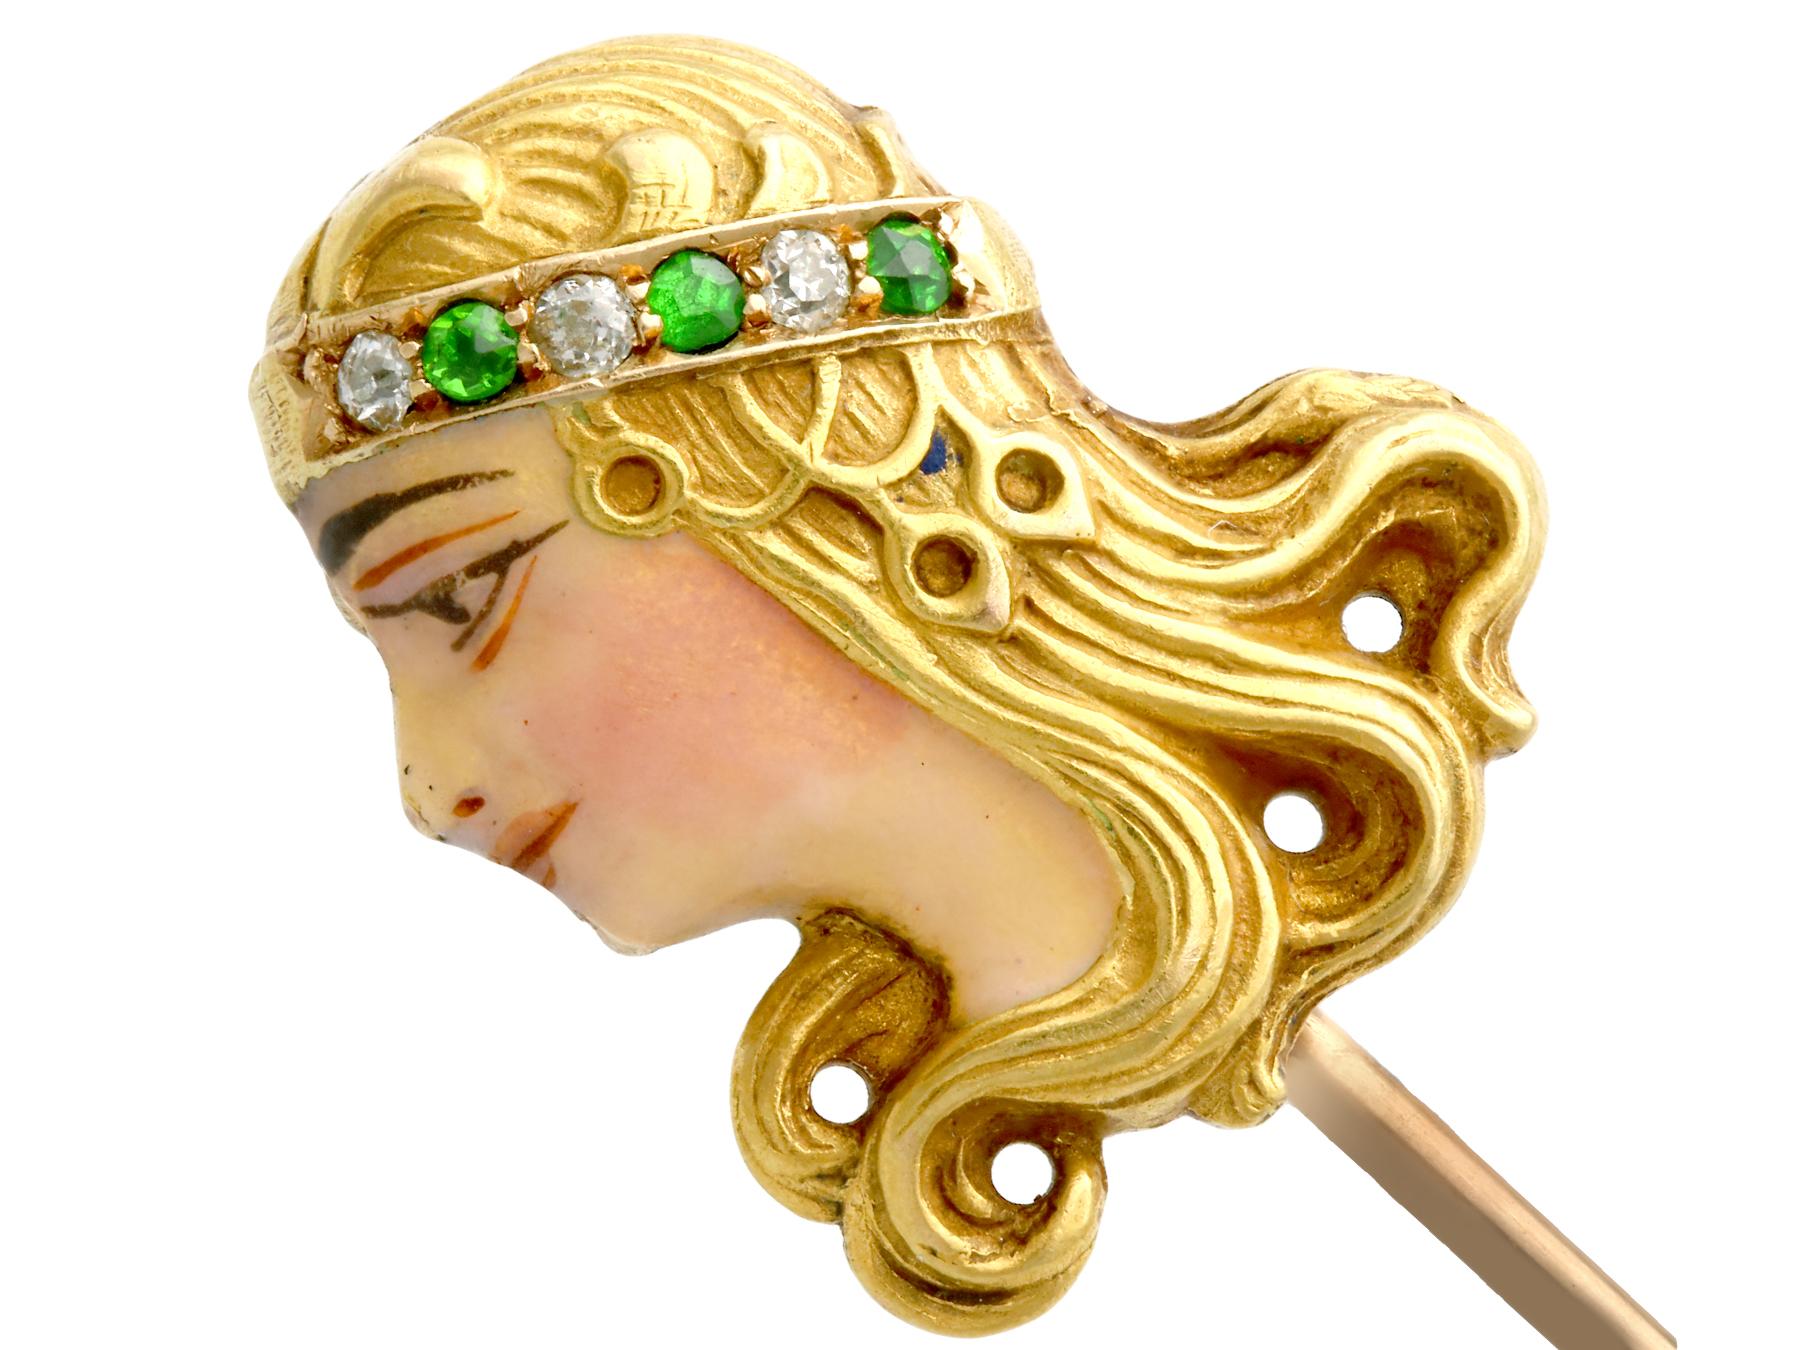 1895 Art Nouveau Diamond and Peridot Enamel and Yellow Gold Pin Brooch In Excellent Condition For Sale In Jesmond, Newcastle Upon Tyne